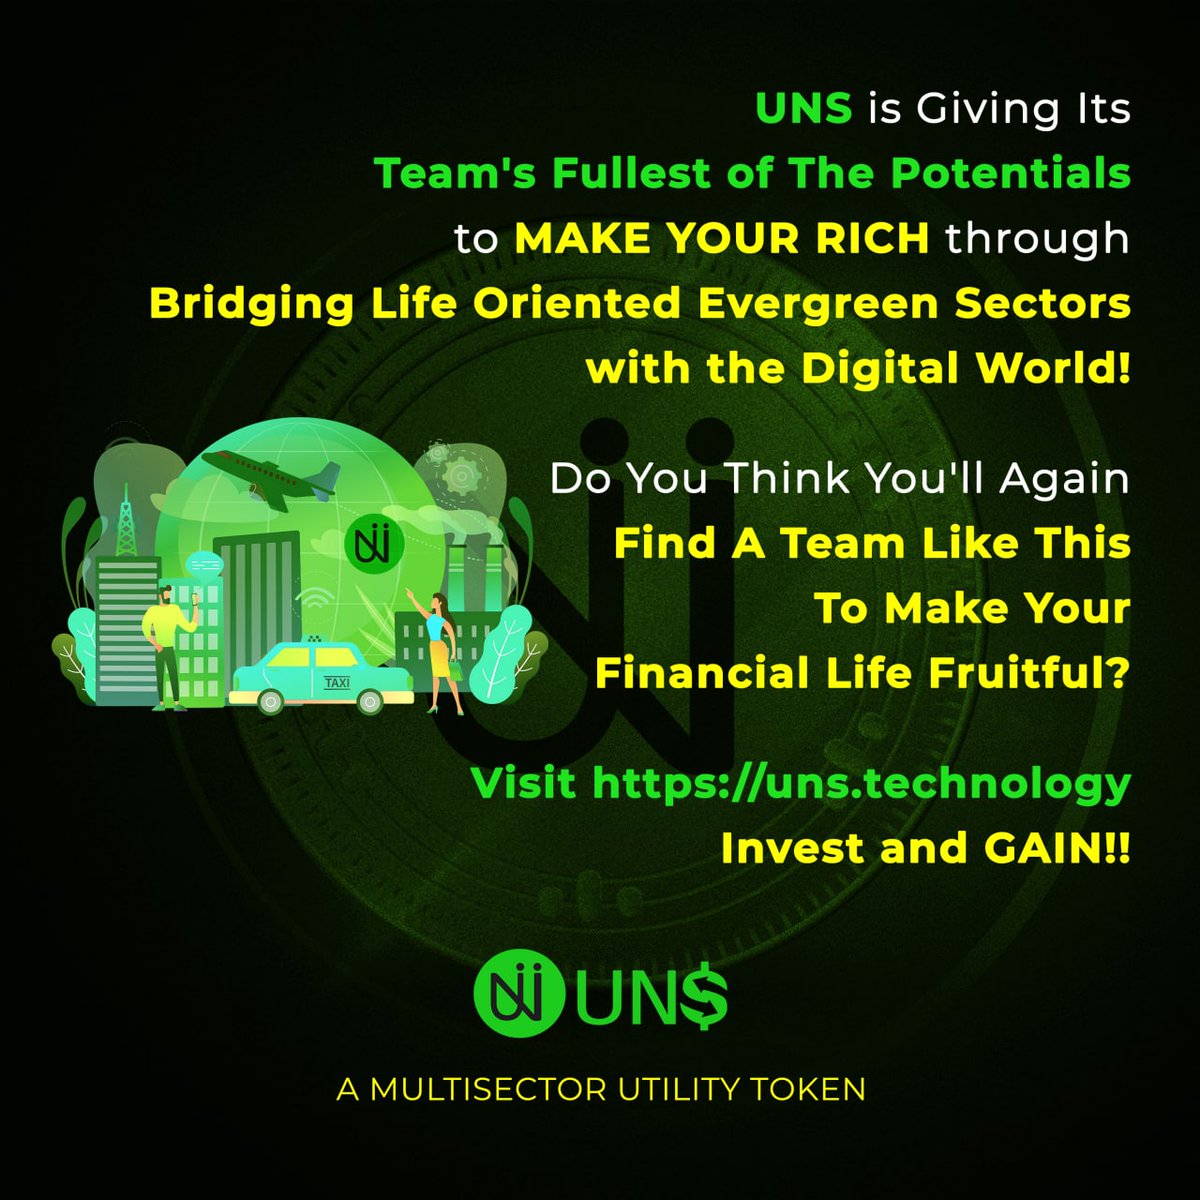 UNS Bridging Life Oriented Evergreen Sectors with the Digital World ⏰